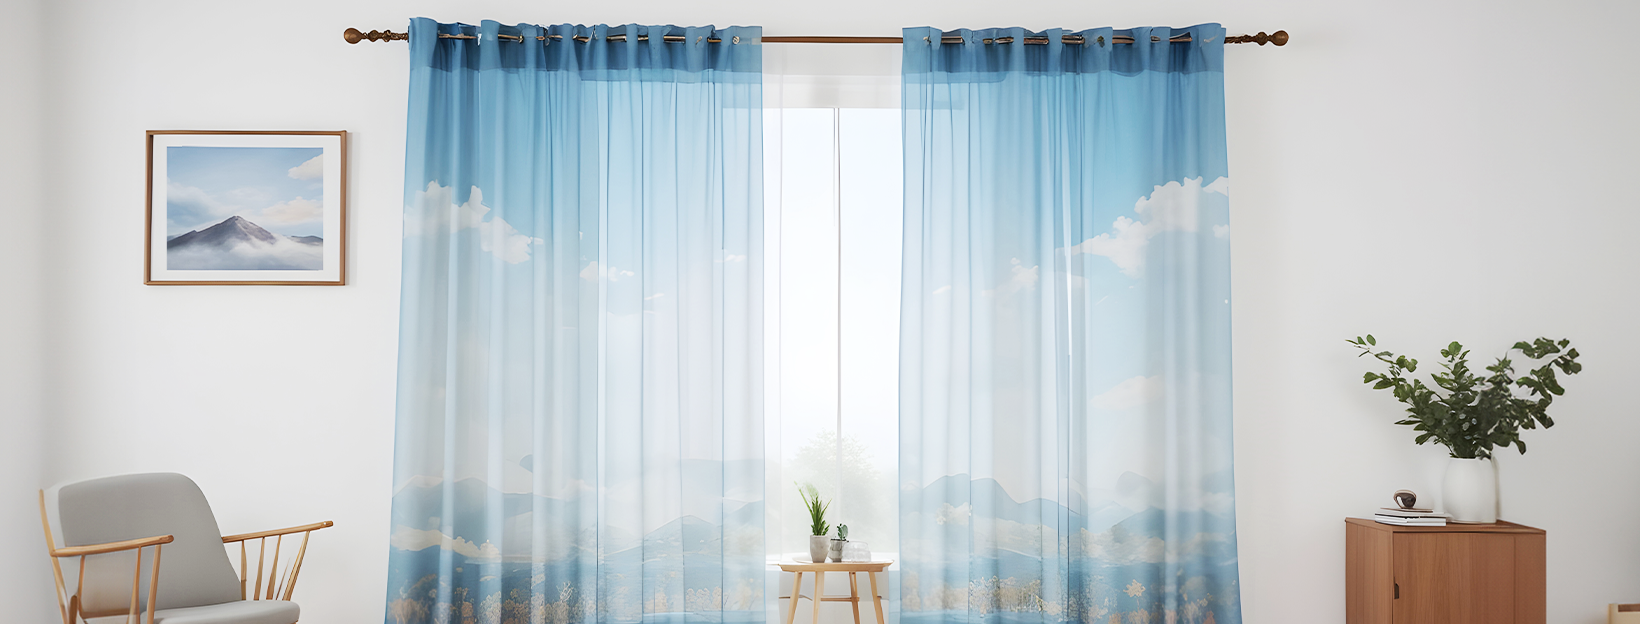 How to Choose Curtains by Color and Functionality